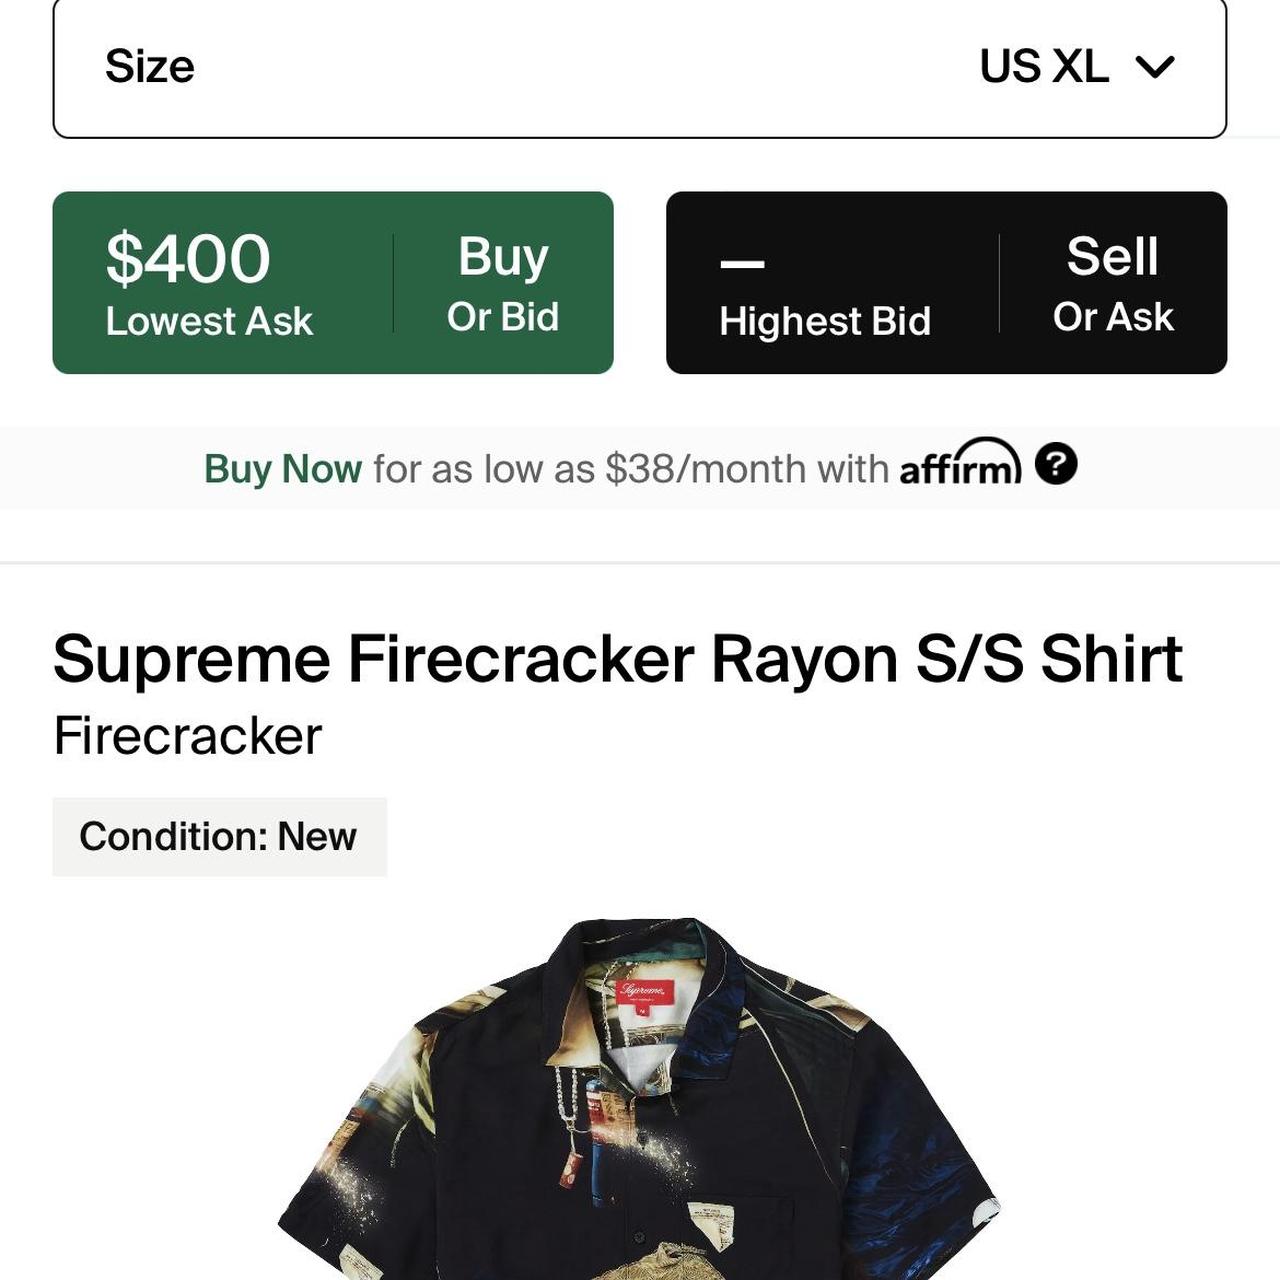 supreme firecracker rayon s/s shirt, only worn once...